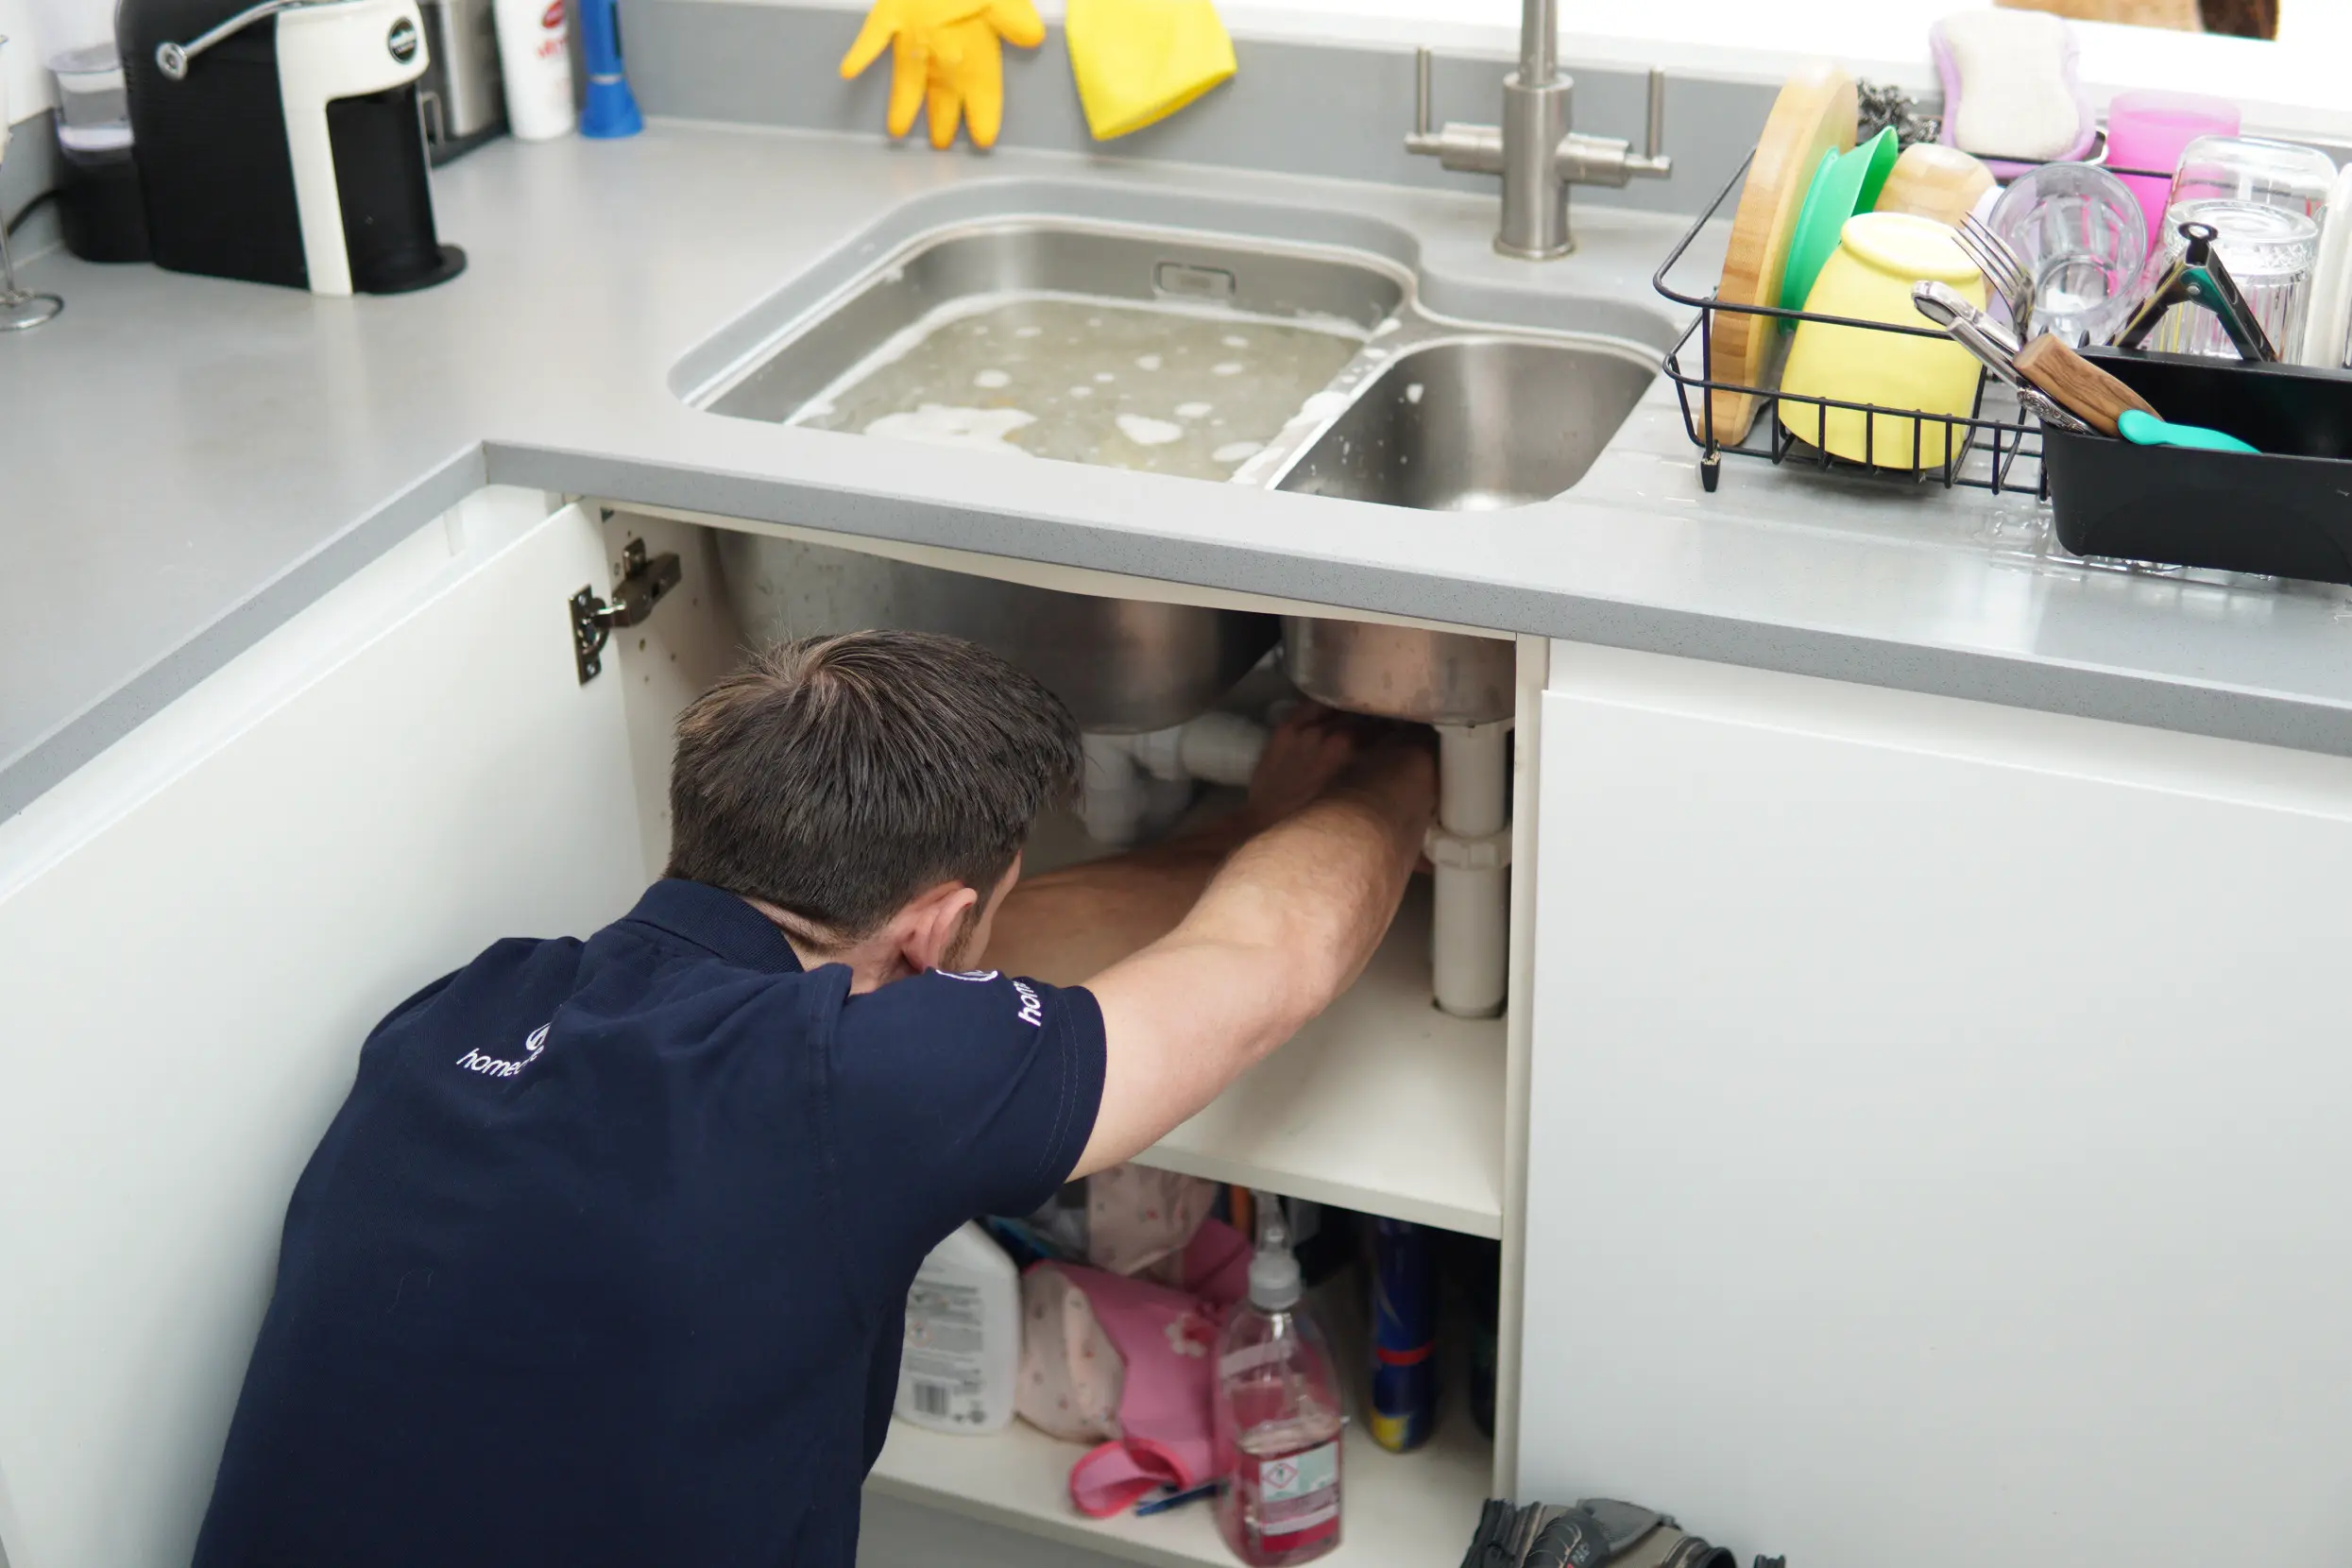 A Homecure plumber fixing a leaking sink